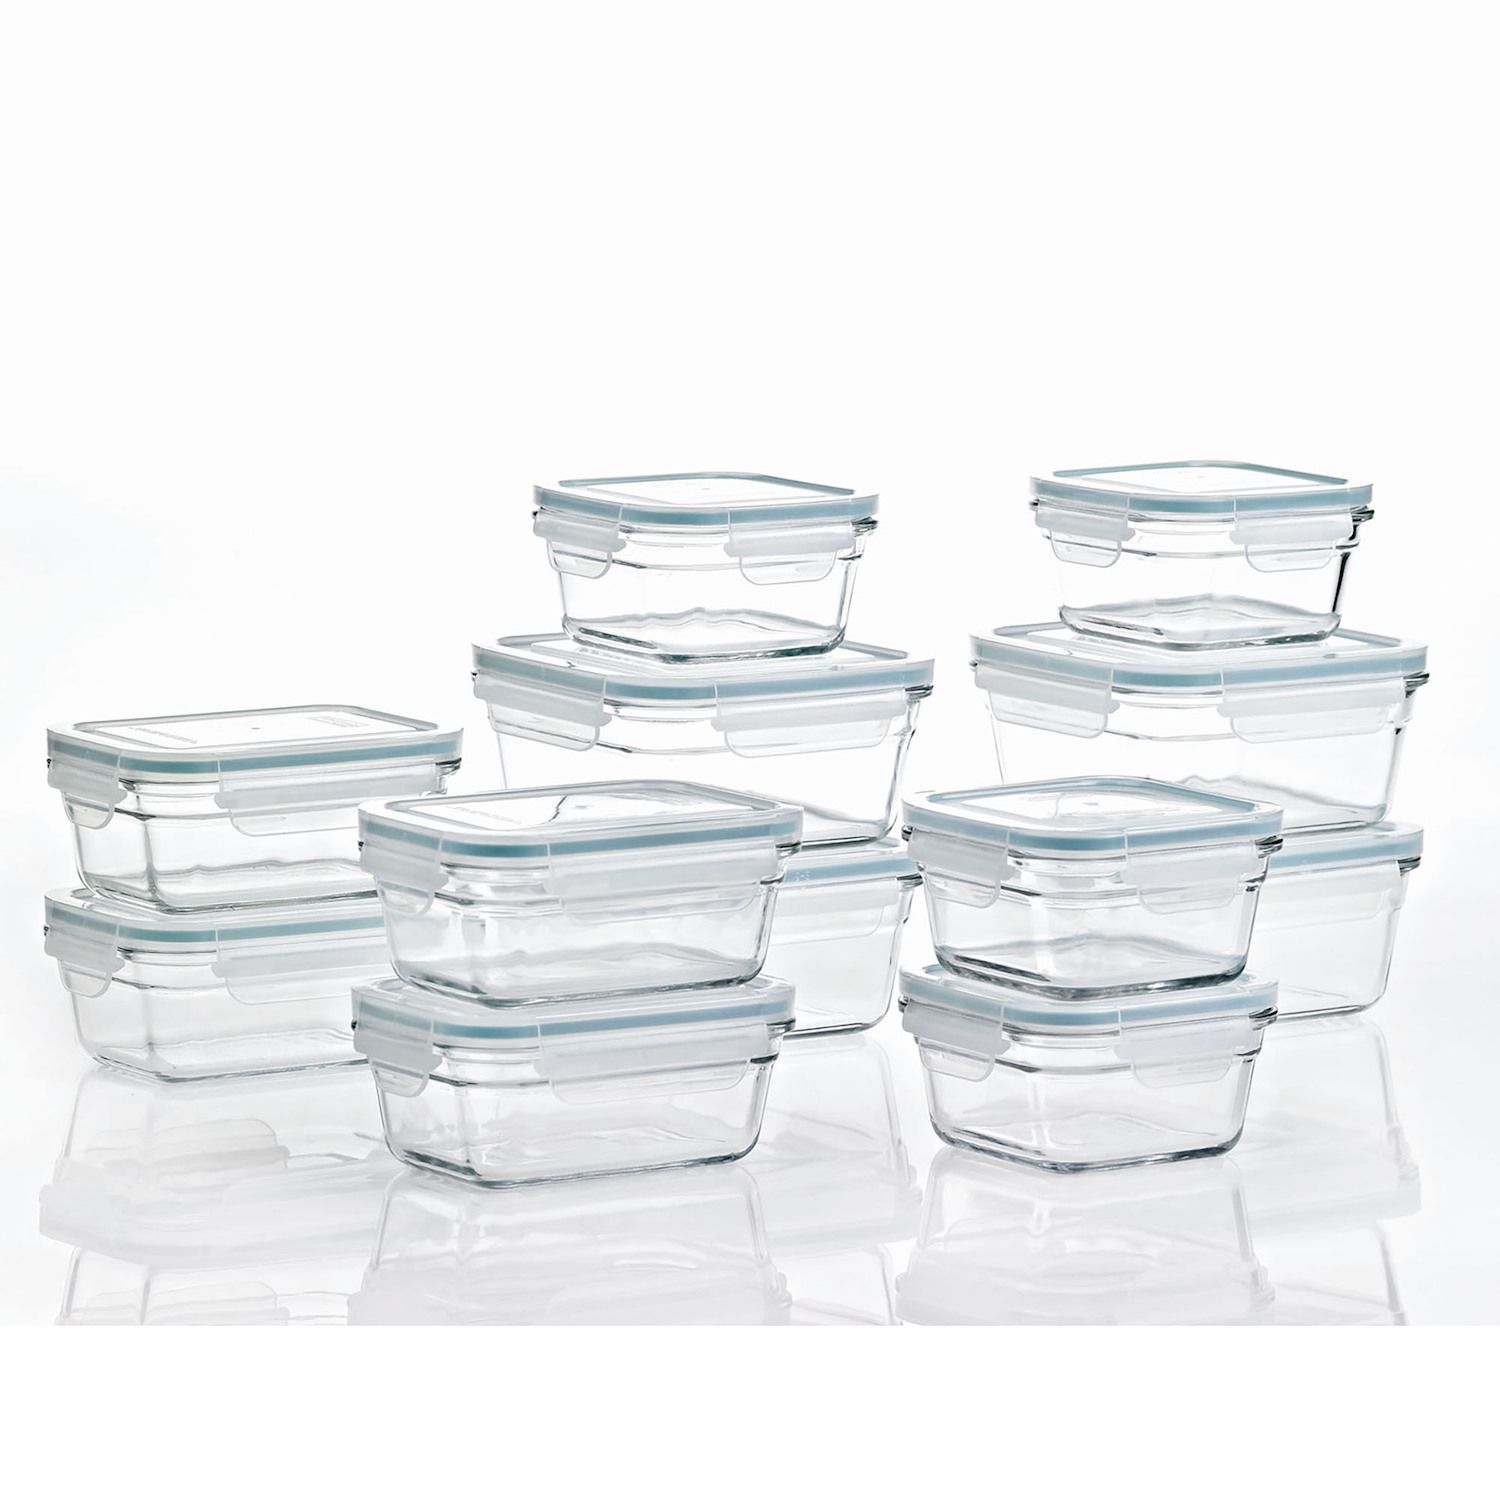 rubbermaid glass baking dishes｜TikTok Search